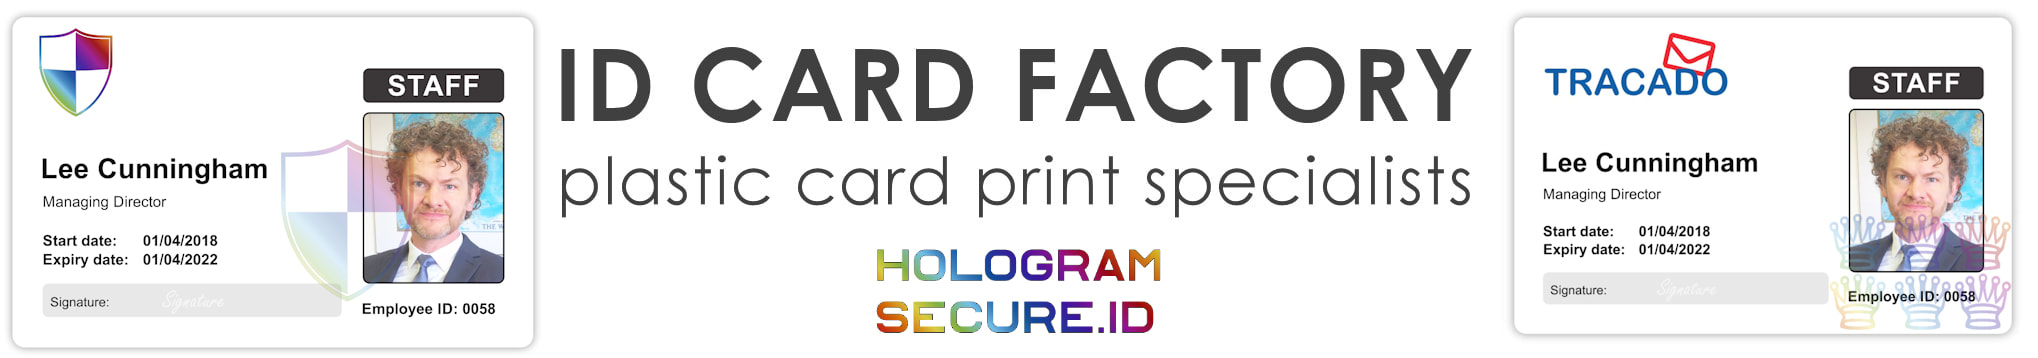 Leeds holographic ID cards | examples of staff photo ID cards | samples of employee Identity card printing | Workers ID cards printed with hologram